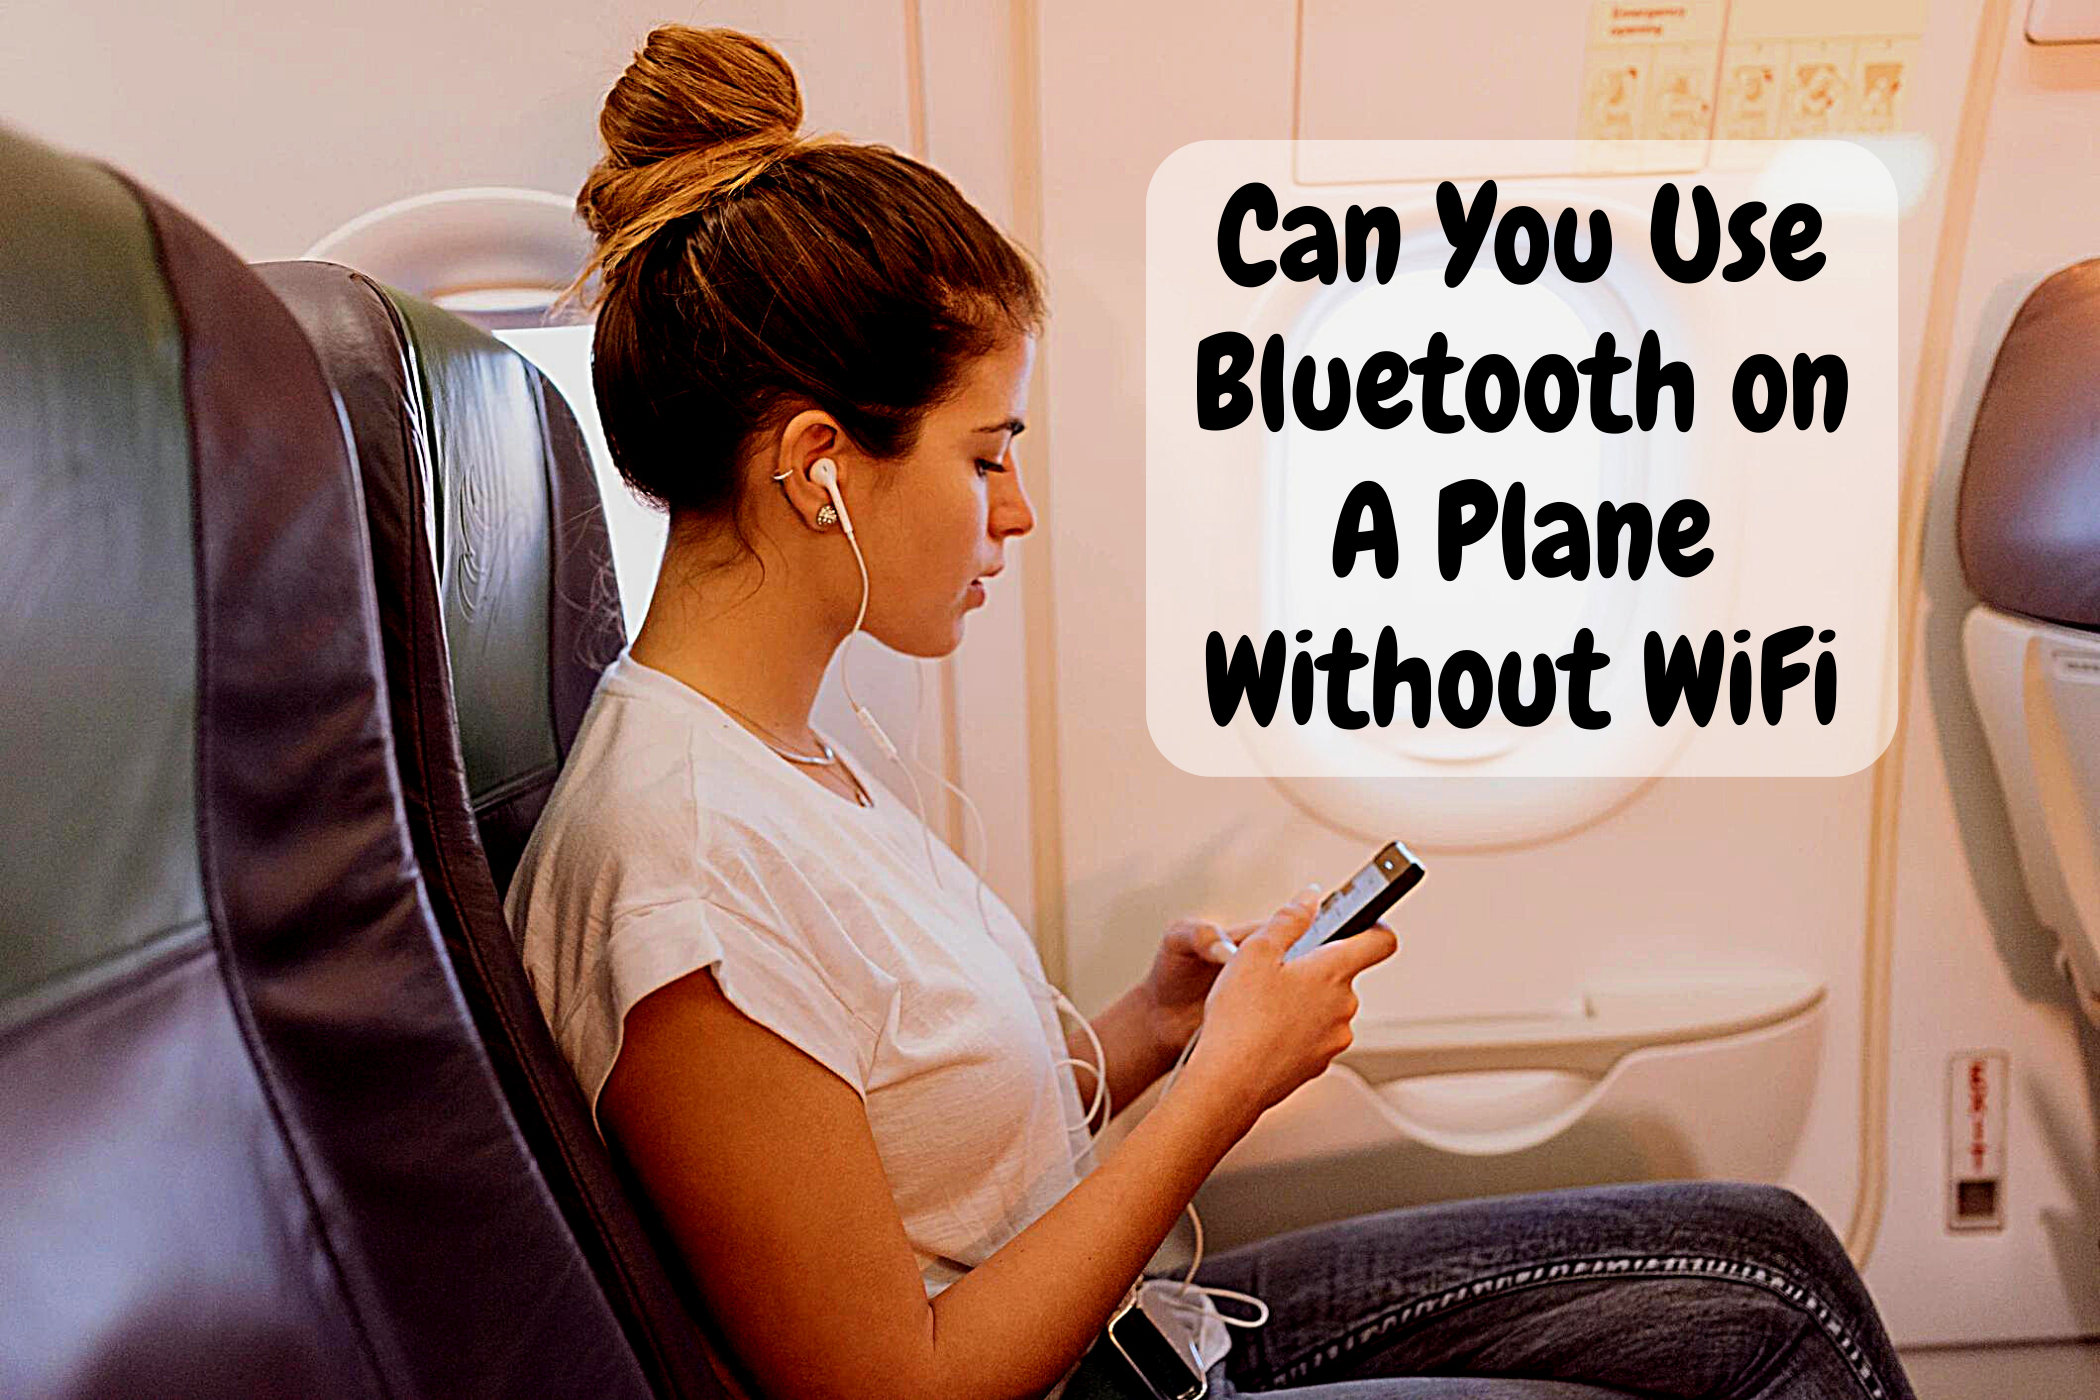 Can You Use Bluetooth on A Plane Without WiFi